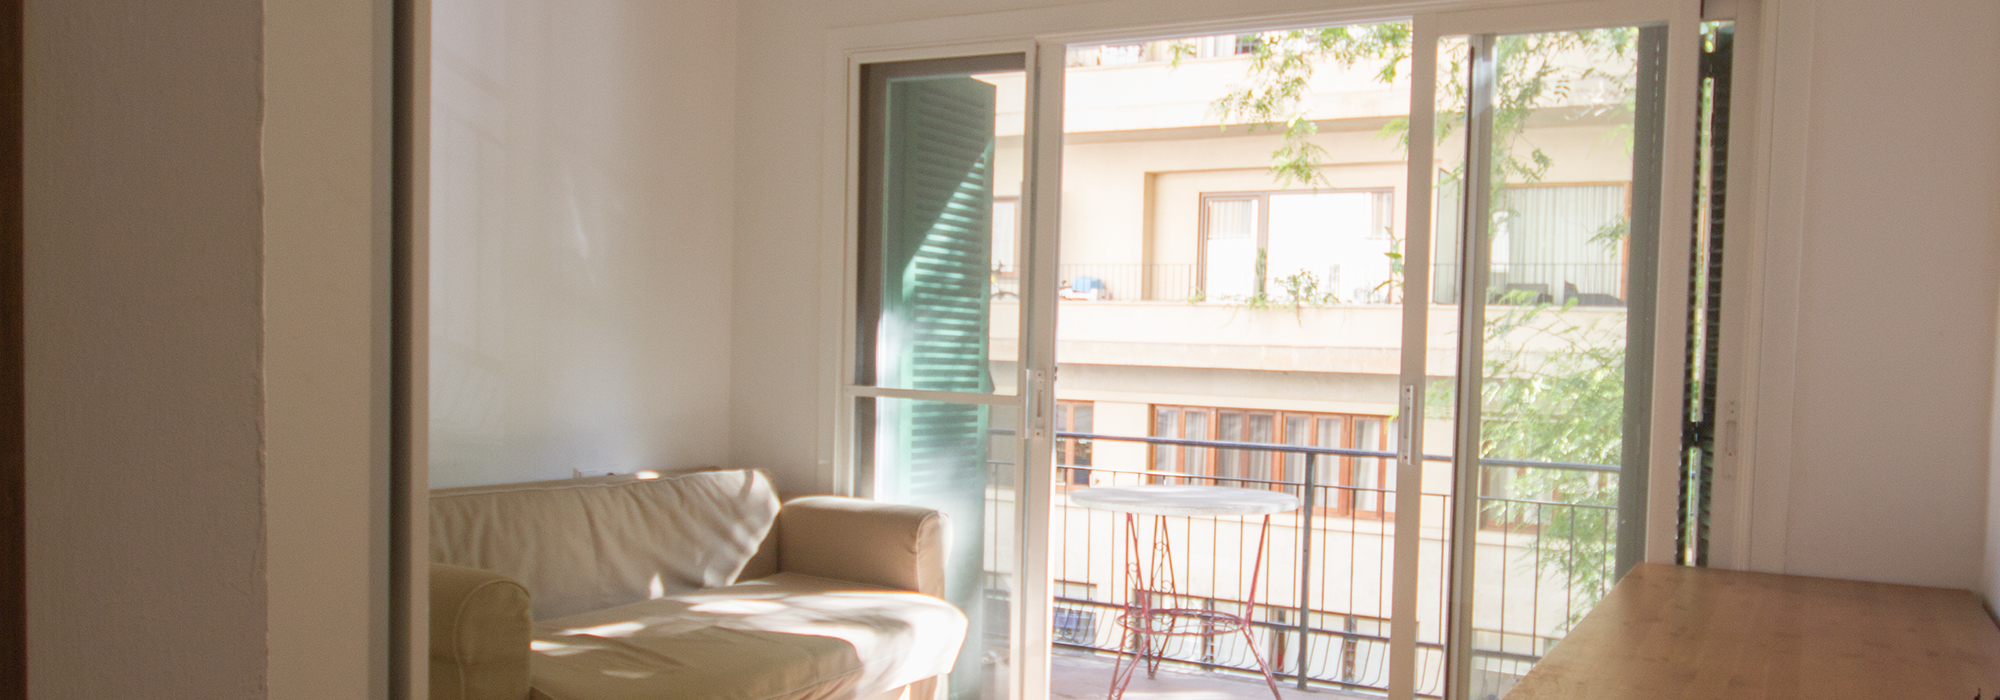 Cosy two bedroom flat for sale in the heart of Palma center-uvm285